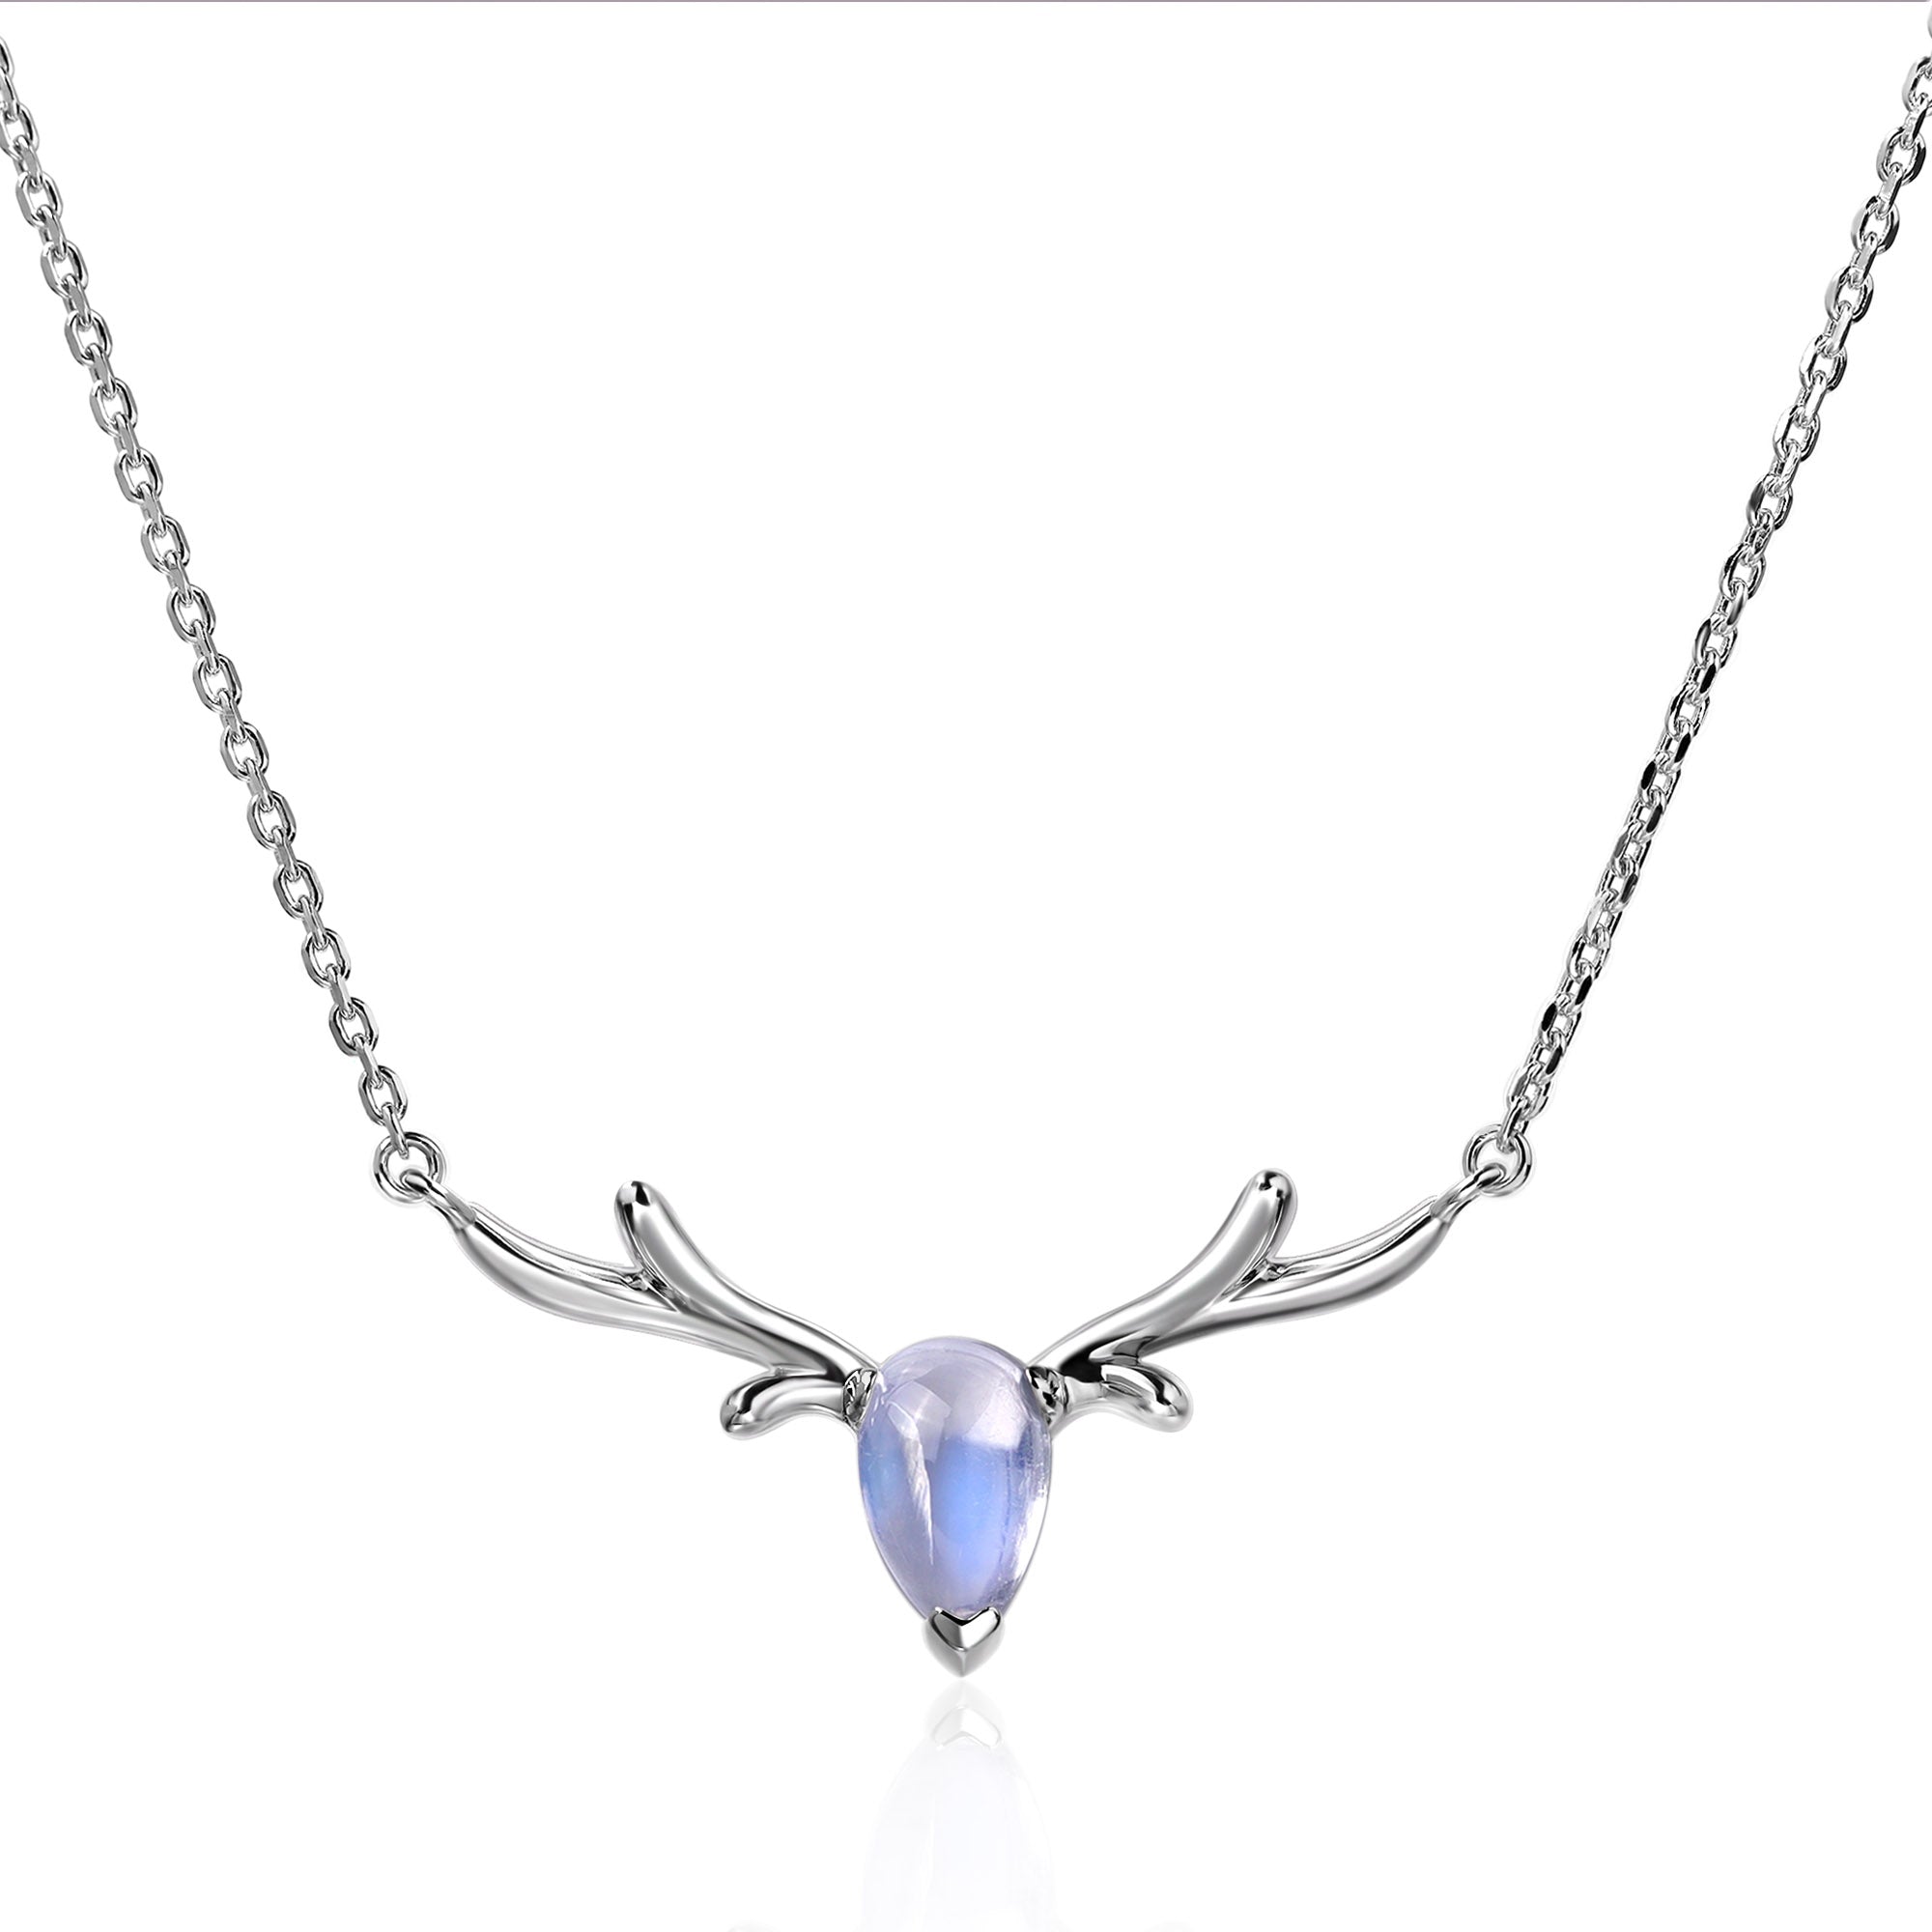 Pear Shaped Moonstone Necklace Antler